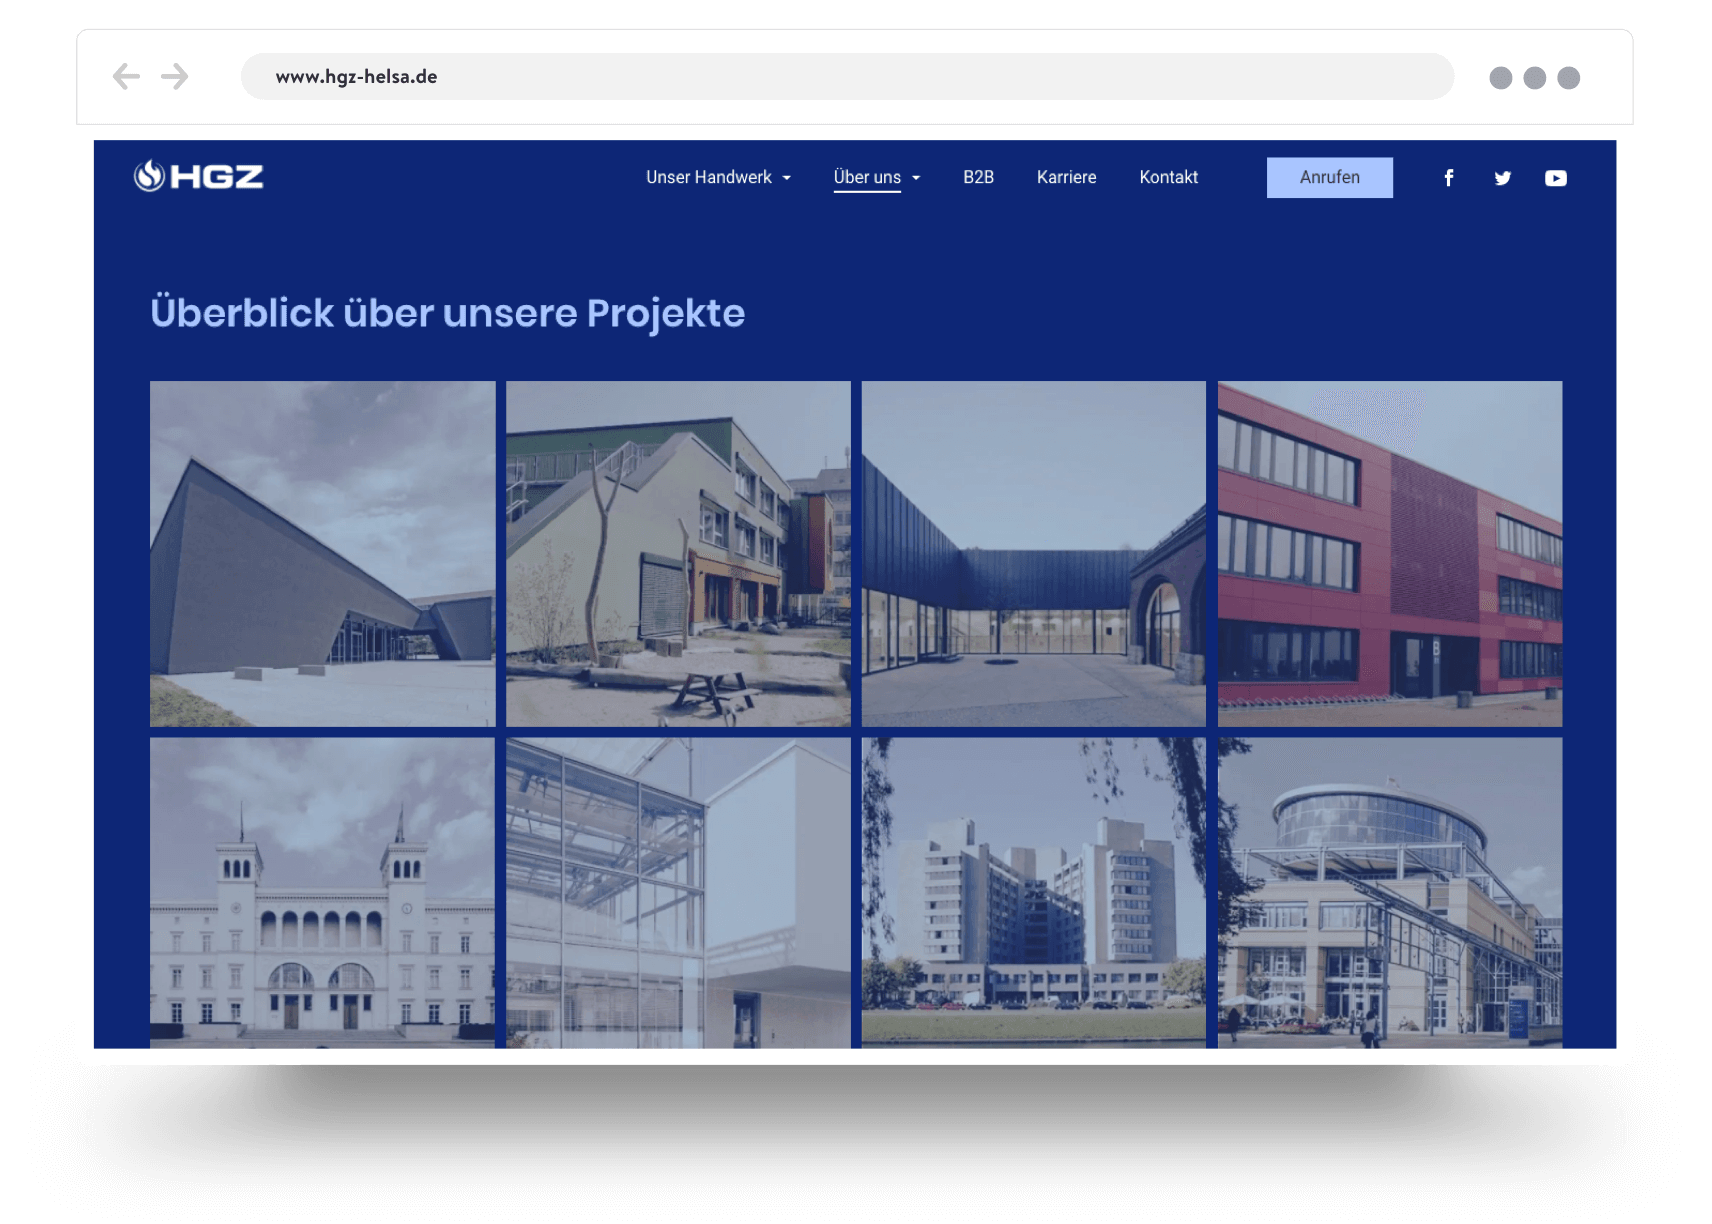 A website gallery page for a construction company show different types of building projects